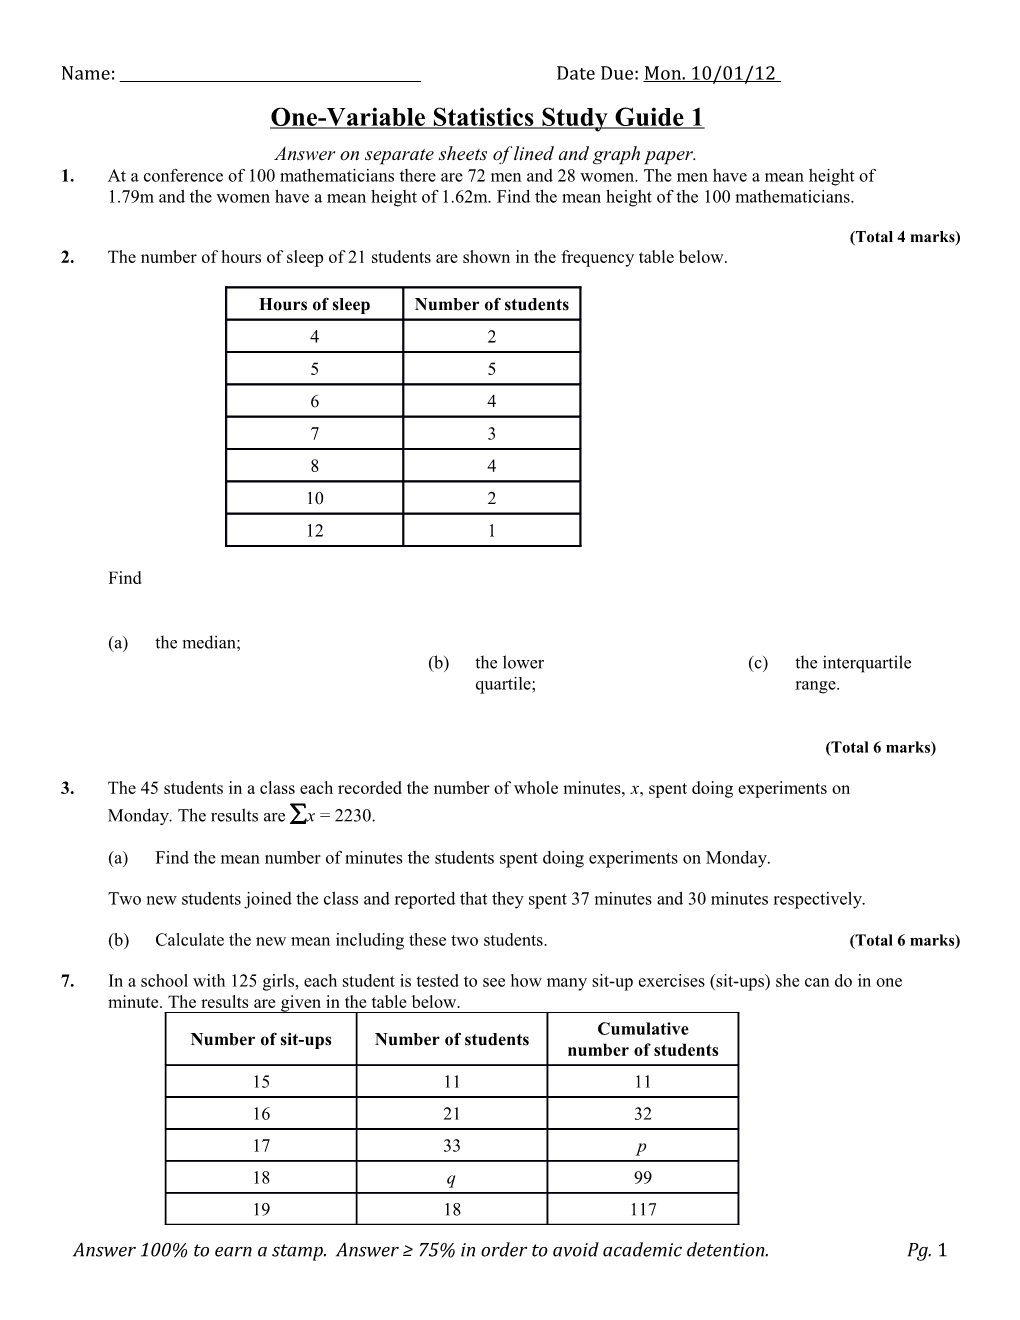 One-Variable Statistics Study Guide 1